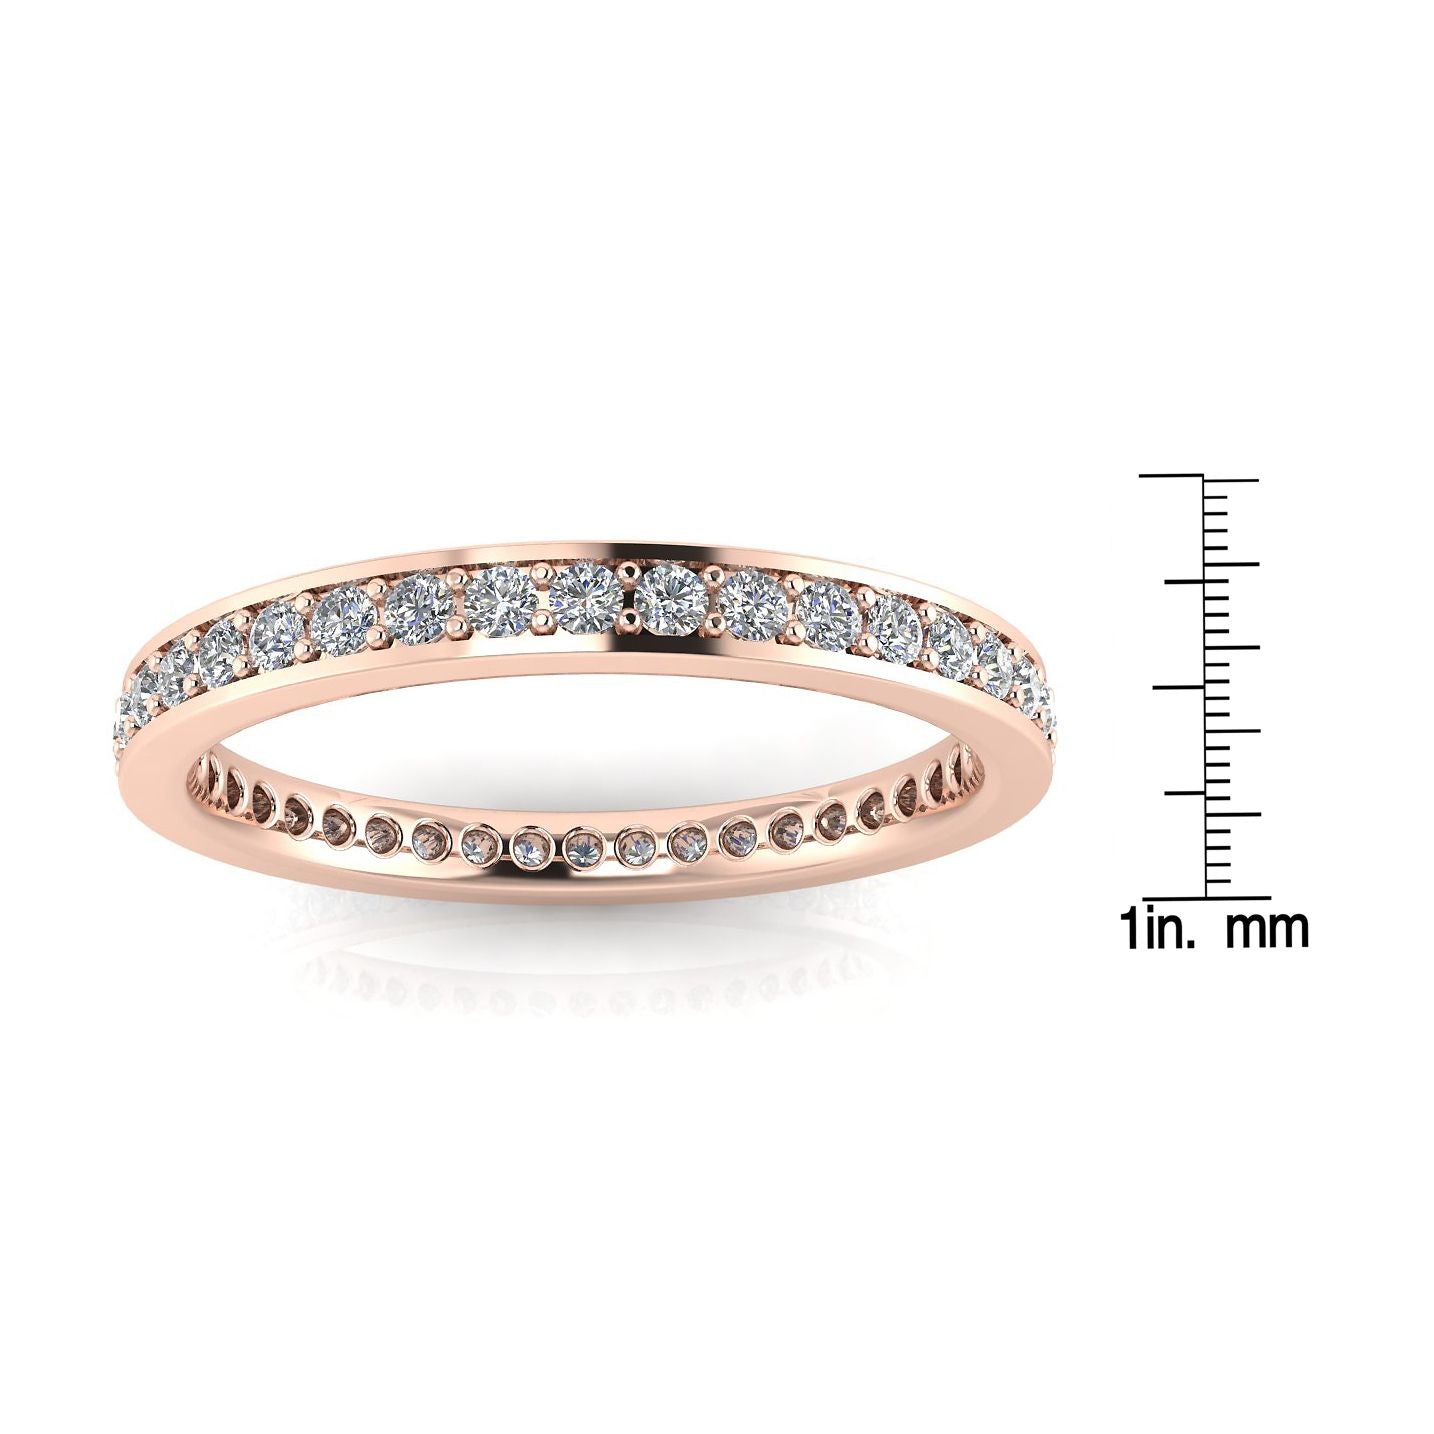 Round Brilliant Cut Diamond Channel Pave Set Eternity Ring In 14k Rose Gold  (0.68ct. Tw.) Ring Size 6